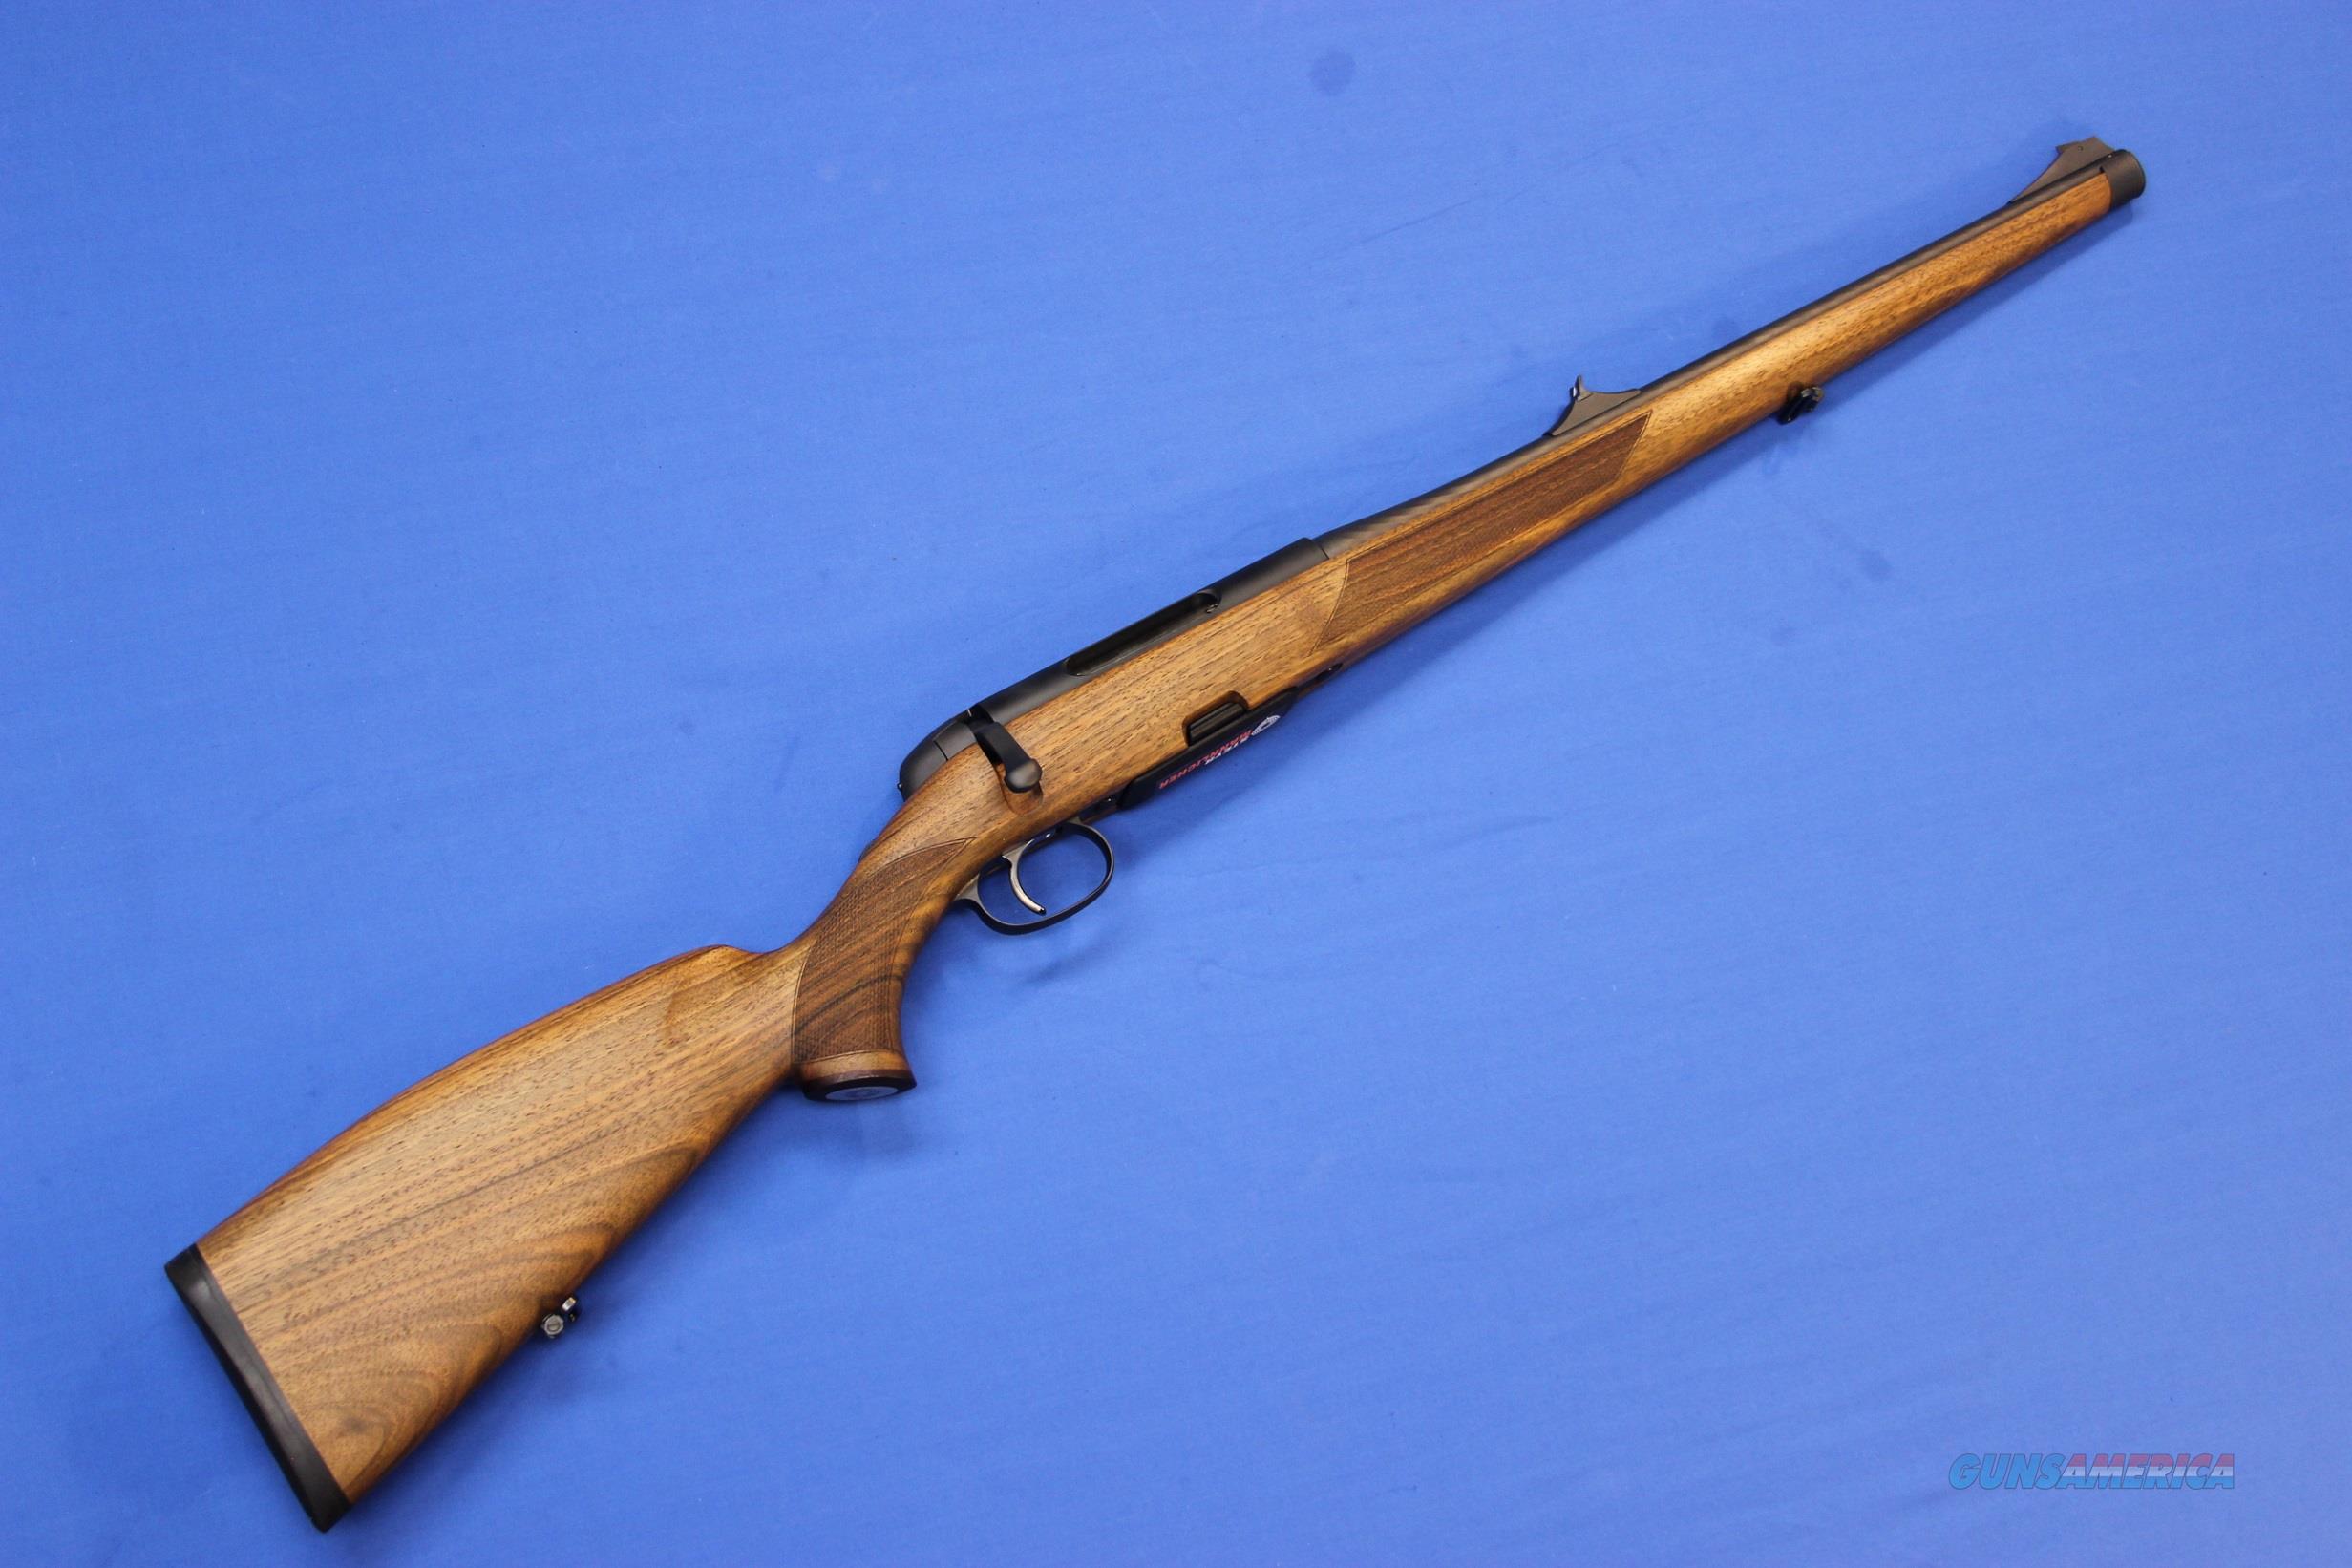 For sale we have a new Steyr Mannlicher Classic rifle in .308 Winchester. 